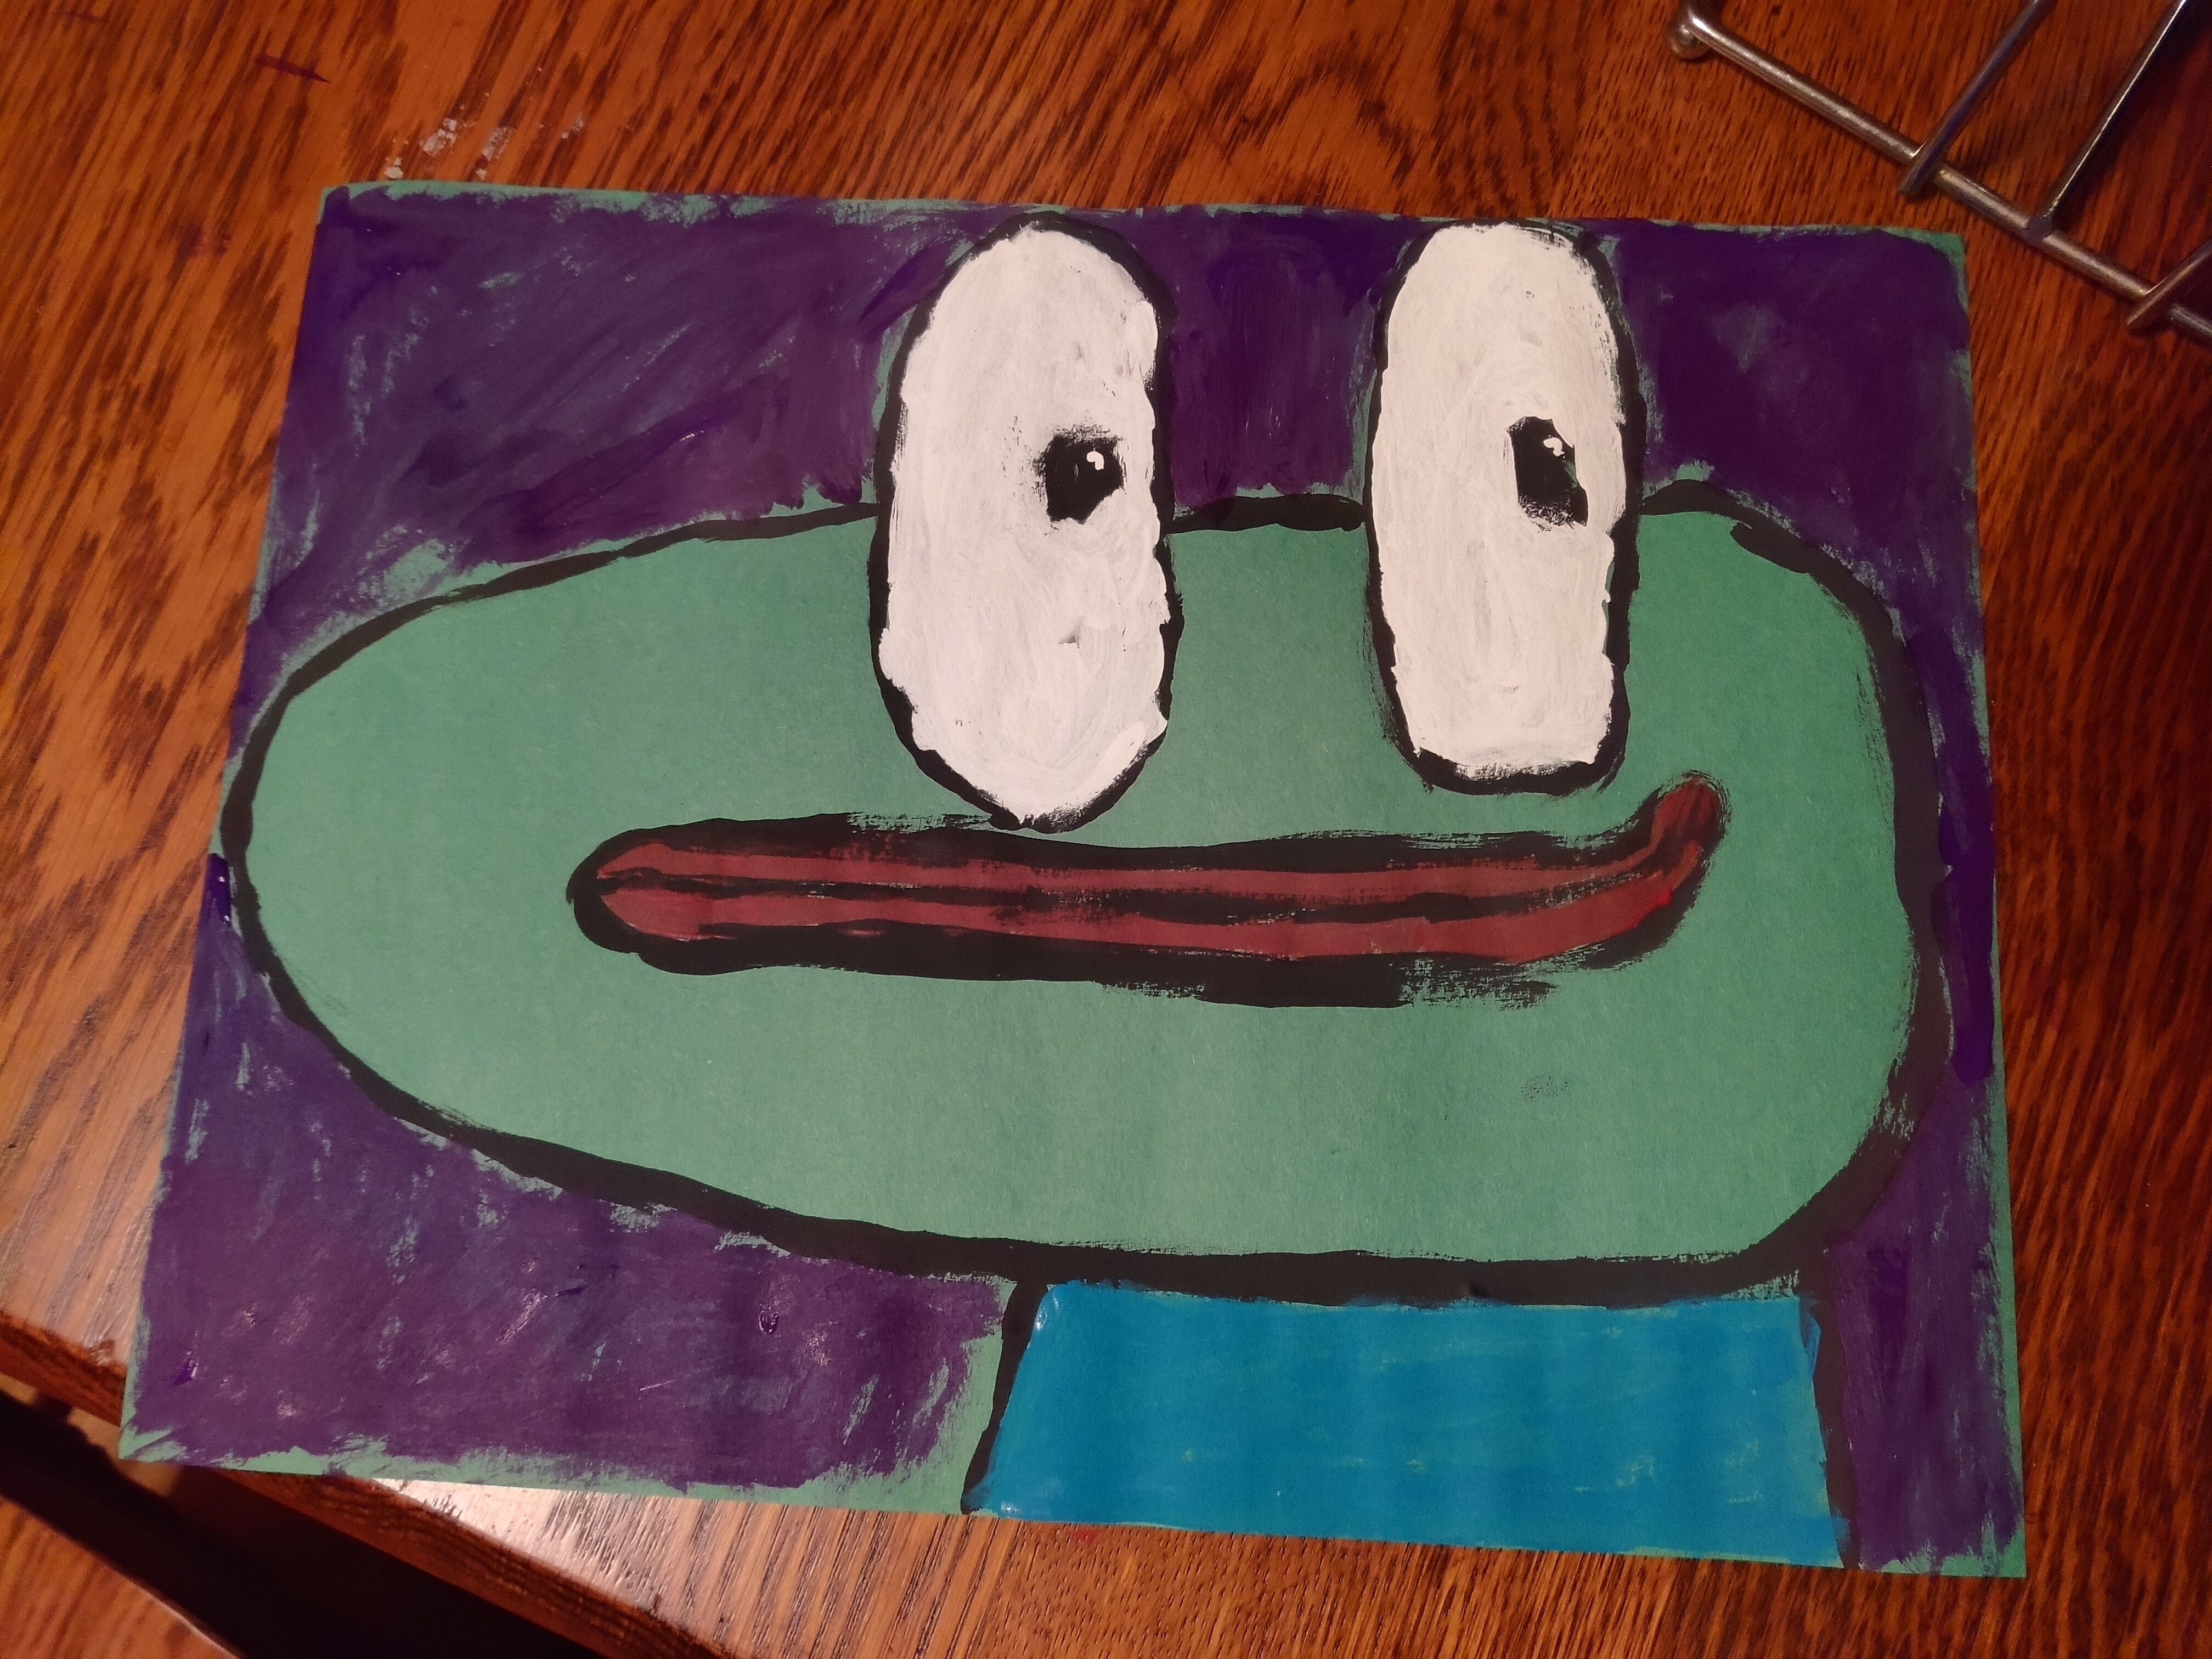 My first painting, I thought of you people